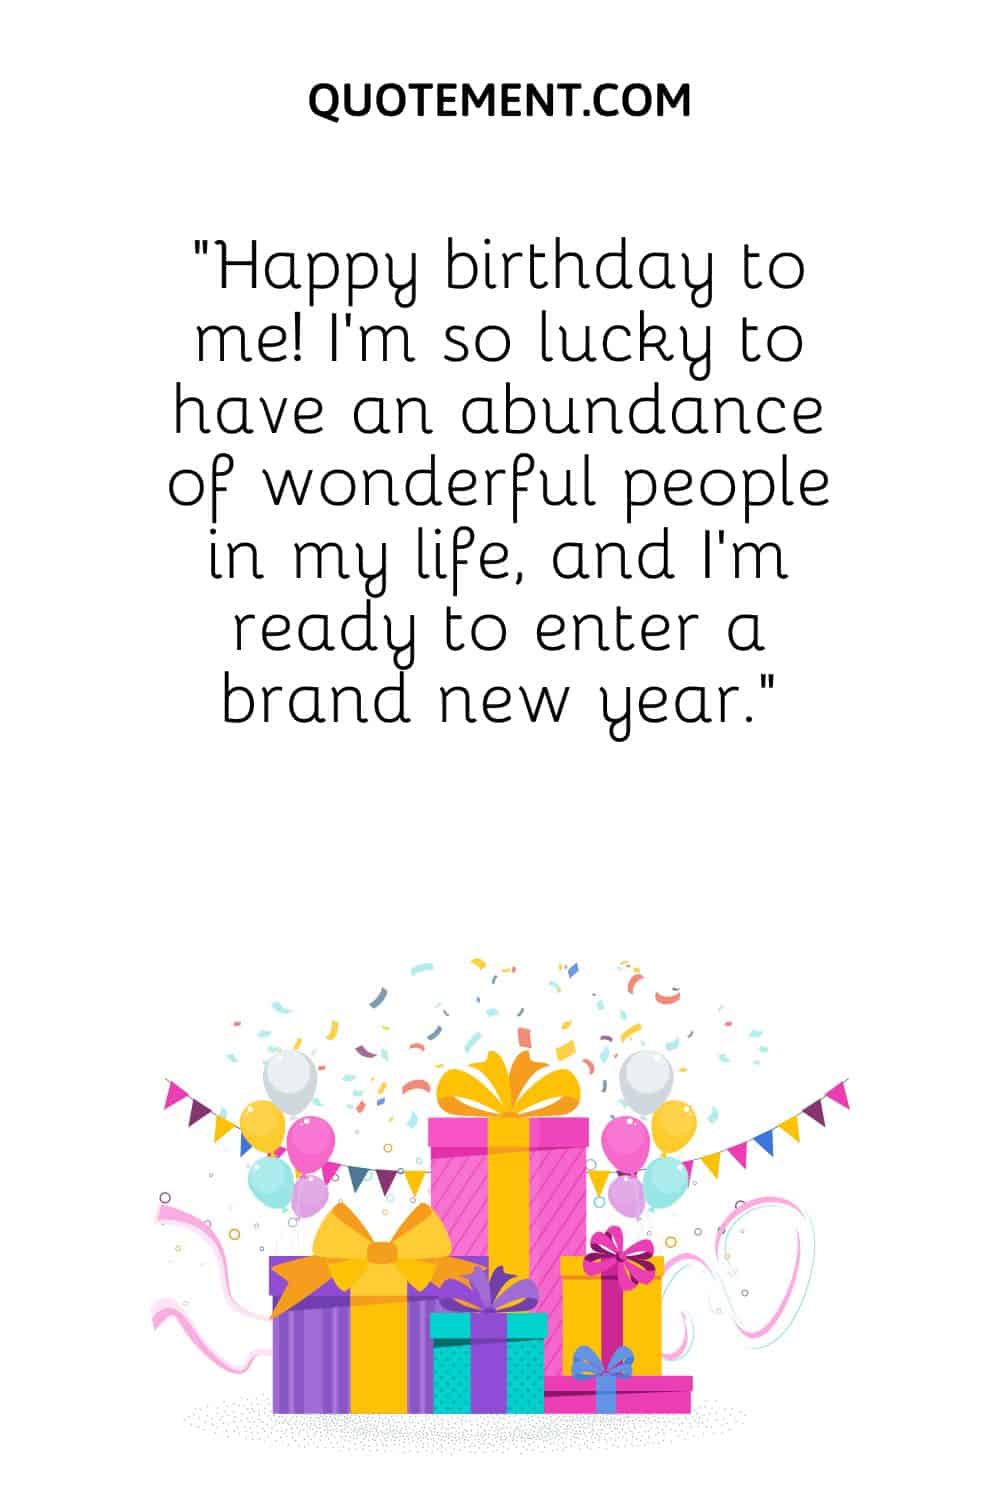 I’m so lucky to have an abundance of wonderful people in my life, and I’m ready to enter a brand new year.